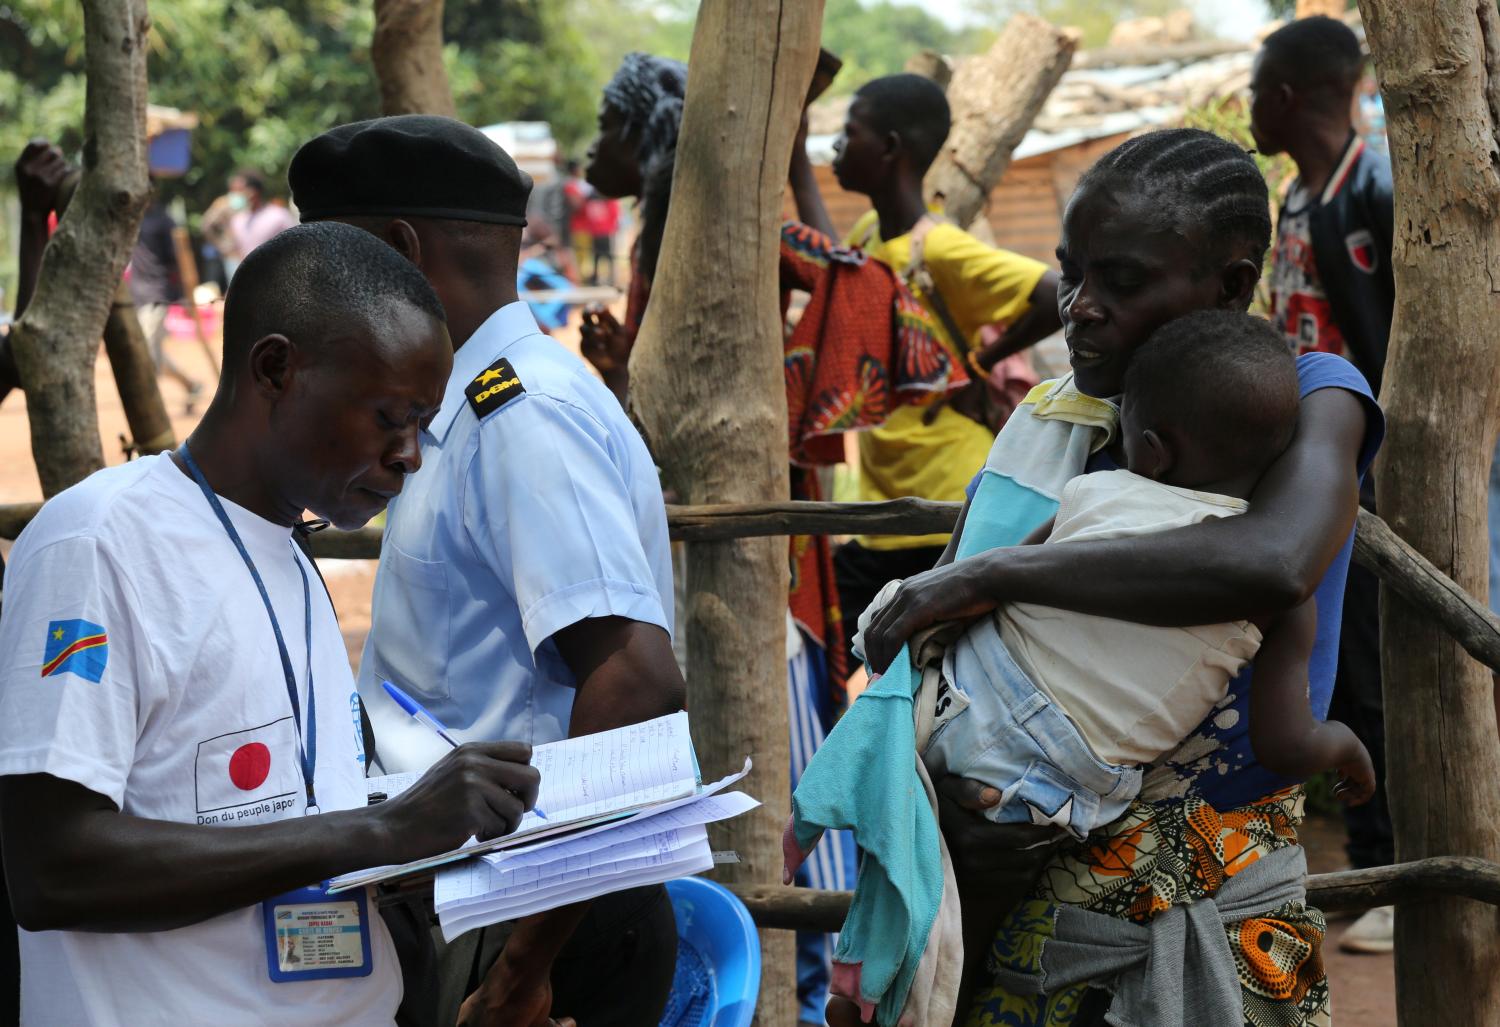 An official from the International Organization for Migration (IOM) collects data and registers a Congolese migrant who crossed from Angola at the Kamako border, Kasai province in the Democratic Republic of the Congo, October 13, 2018. Picture taken October 13, 2018. REUTERS/Giulia Paravicini - RC1D32E4EC70